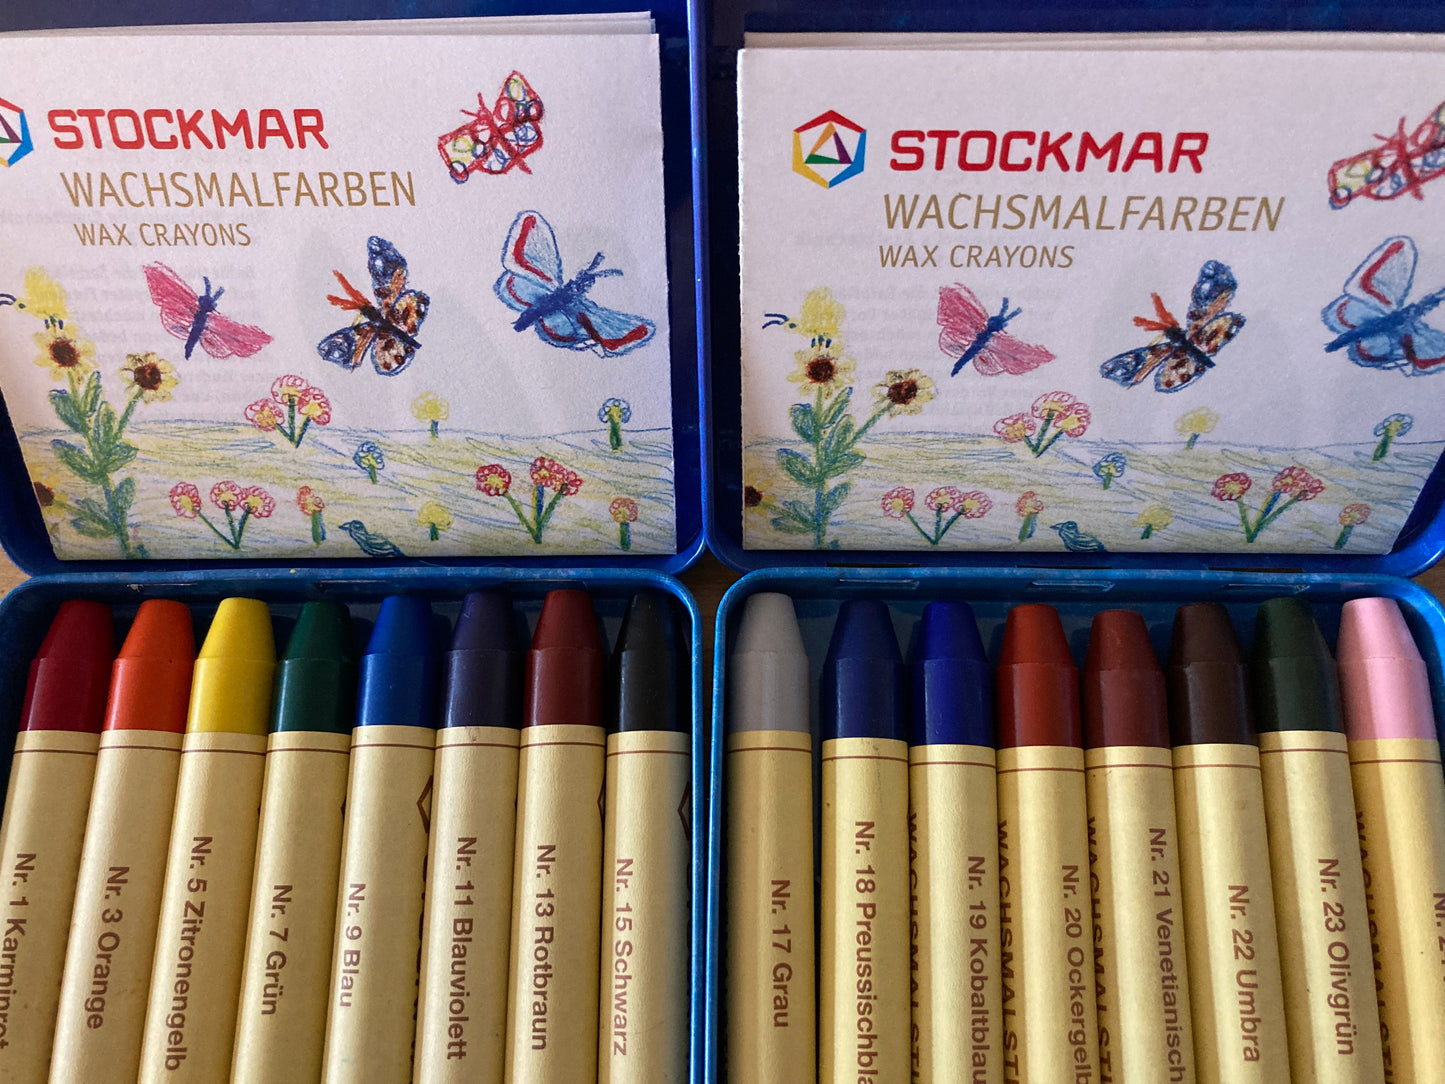 Beeswax, Art - 16 COLOURS IN TWO TINS OF 8 BEESWAX STICK CRAYONS!